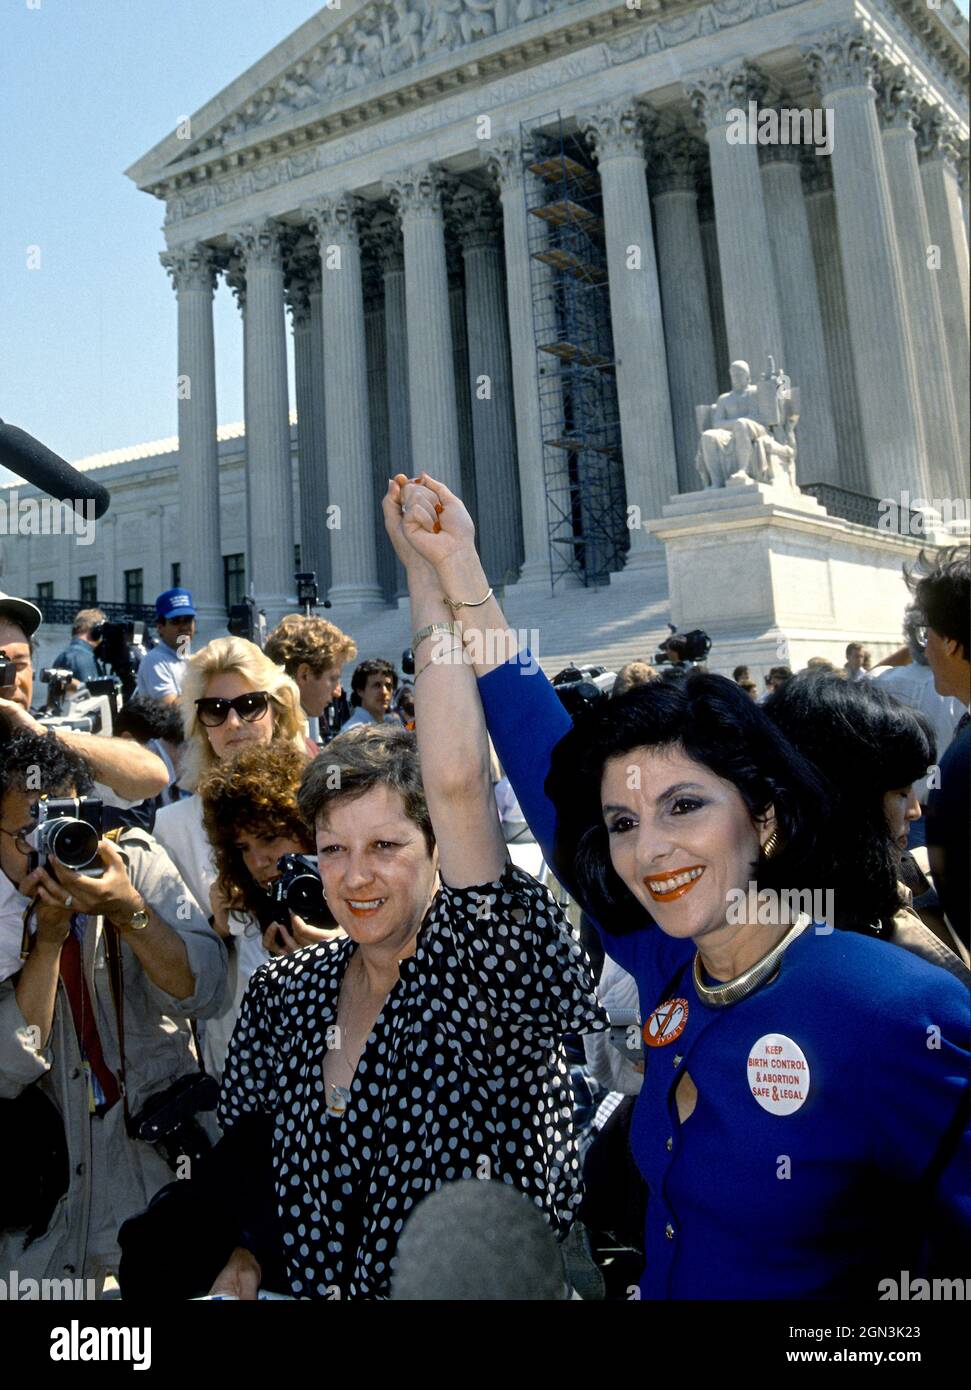 Norma McCorvey, known by the pseudonym "Jane Roe,” the plaintiff in the  landmark 1973 United States Supreme Court decision Roe v. Wade, attends a  rally with her attorney, Gloria Allred, on the